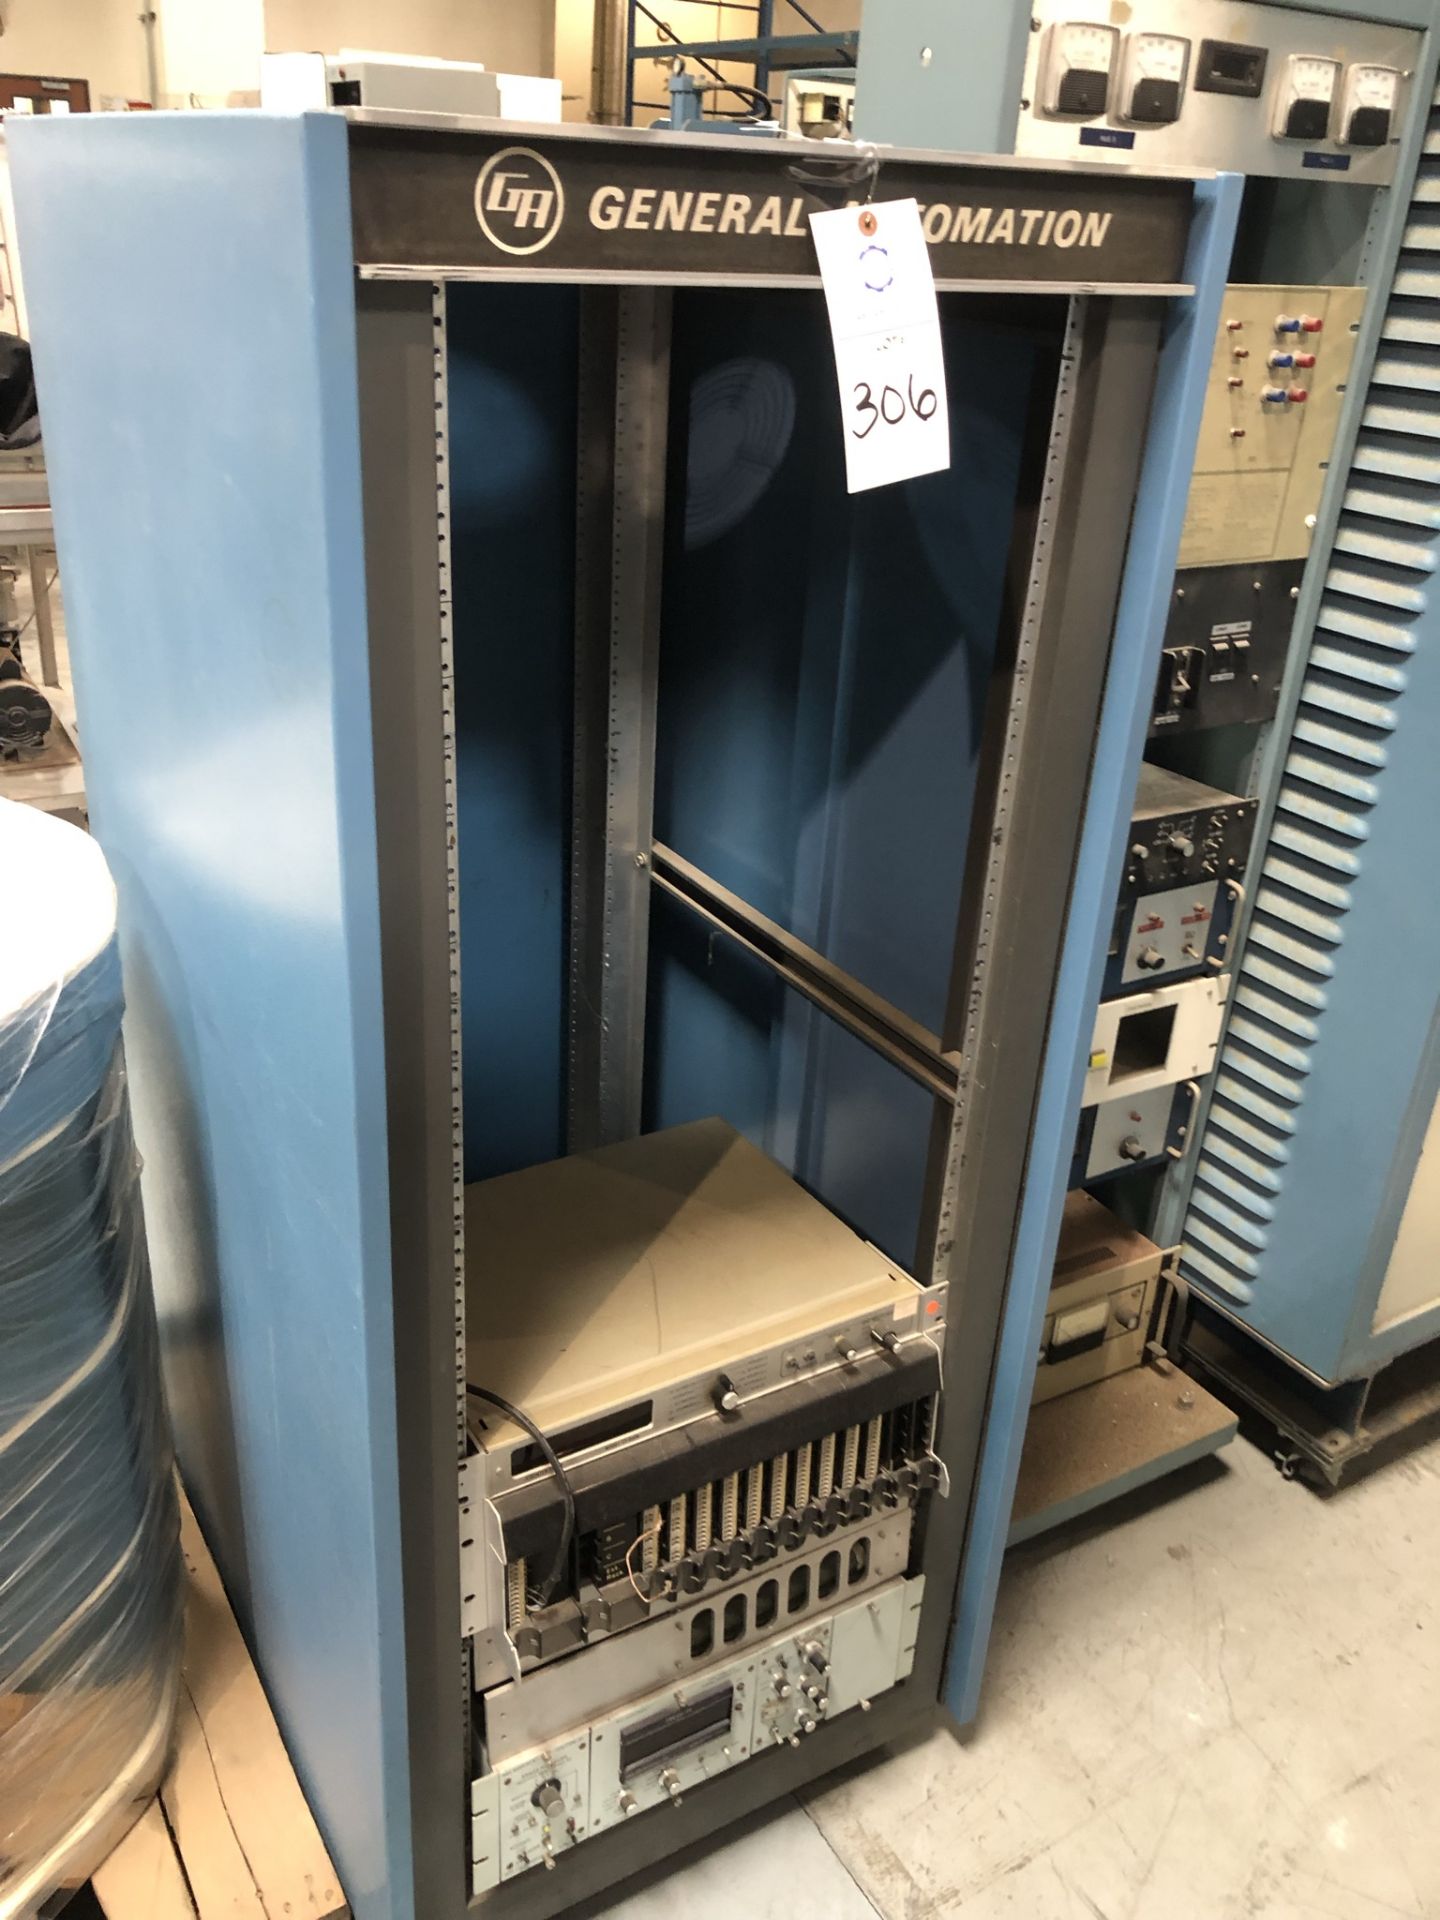 General Automation 19" rack, NKS Baratron pressure readout and control systems with misc 19" rack